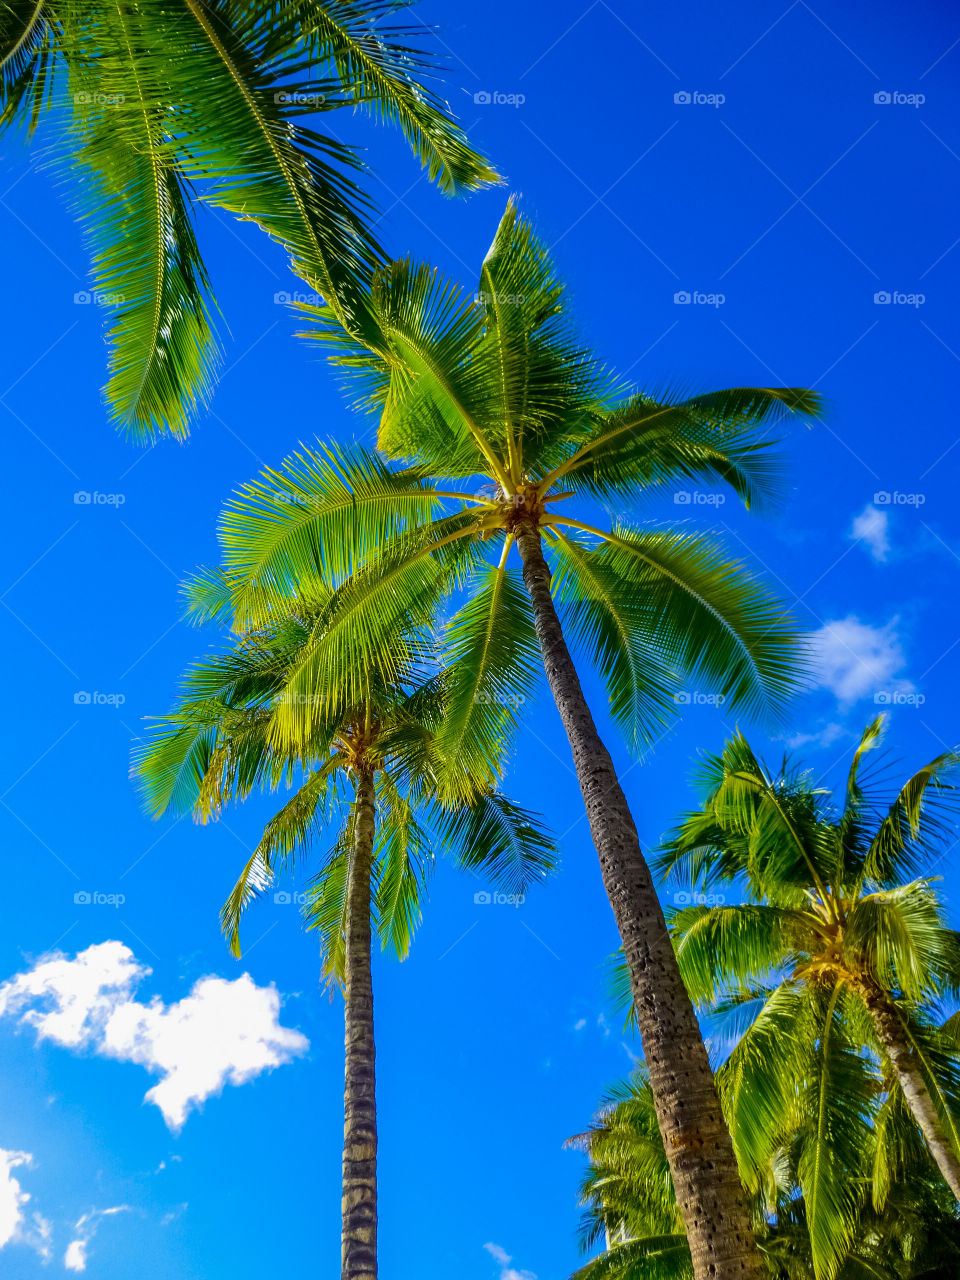 Palm trees and blue sky. Vacation anyone?
Yes, we could use that Piña Colada too. 